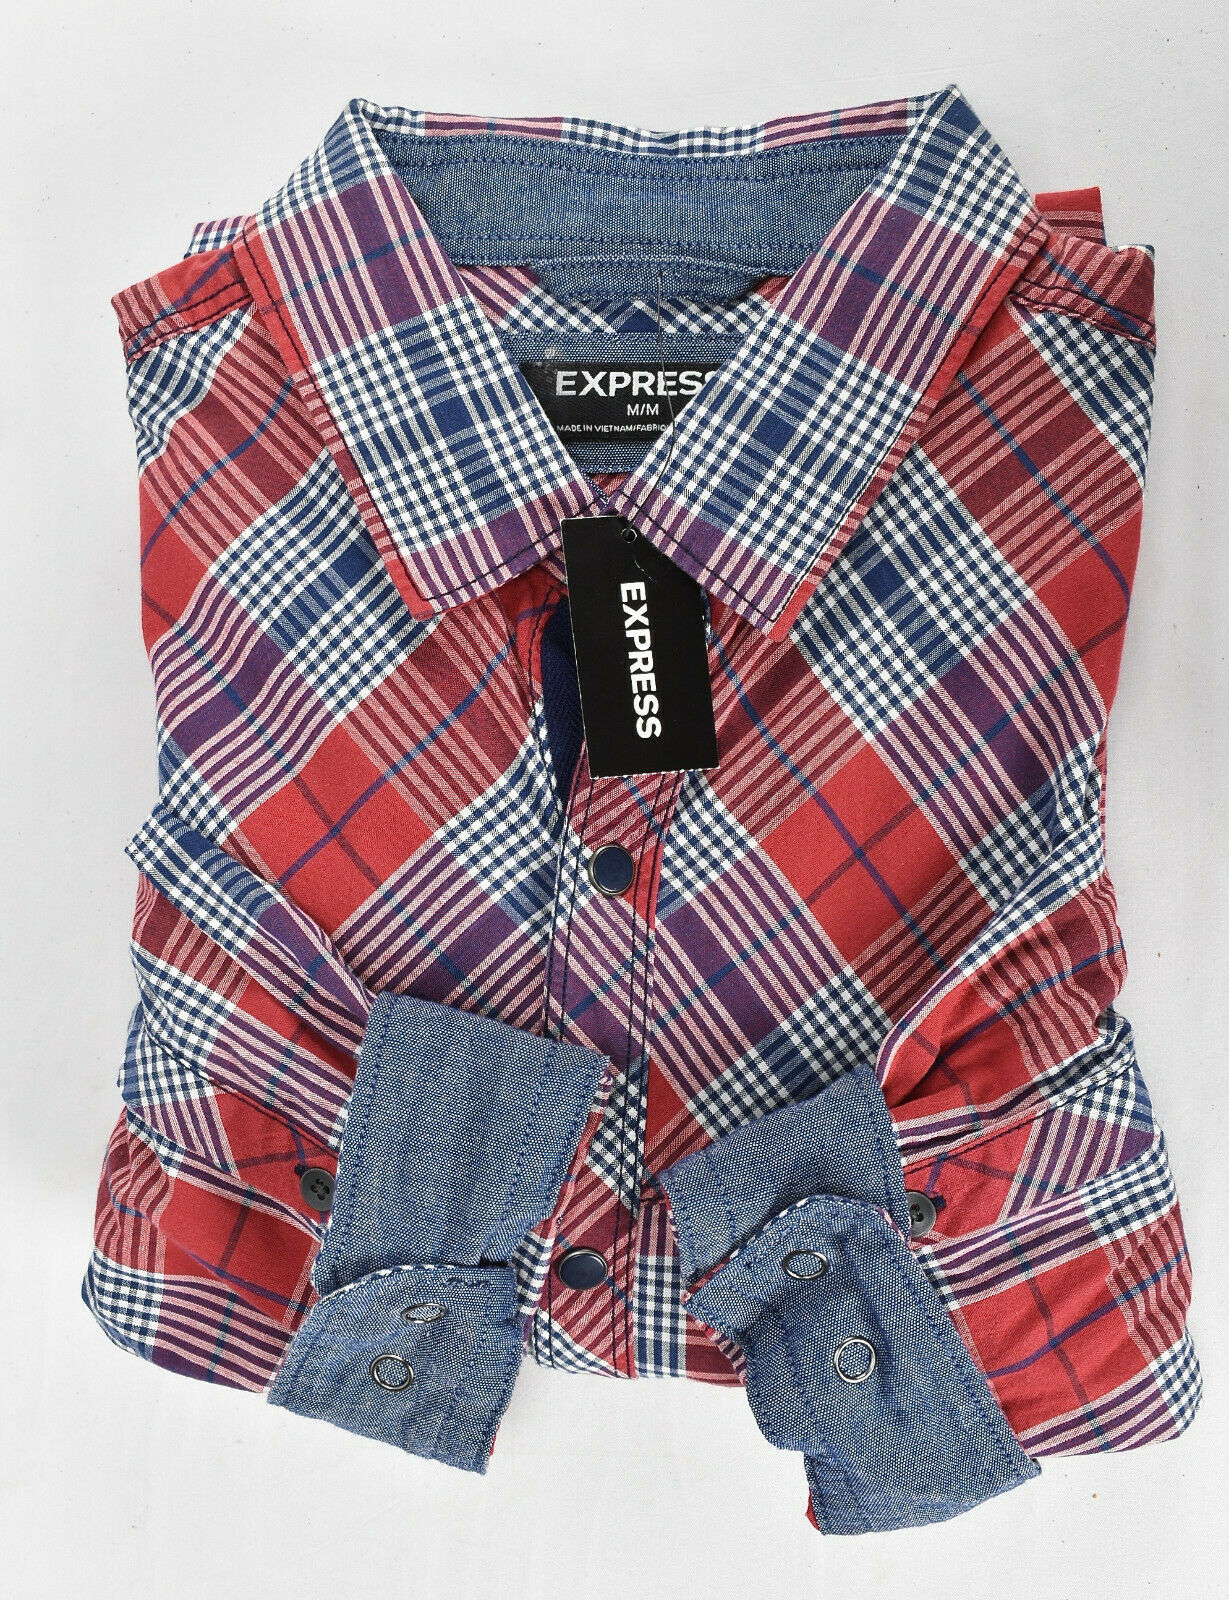 Primary image for Express Plaid Snap Button Down Flip Cuff Shirt Mens Medium NWT